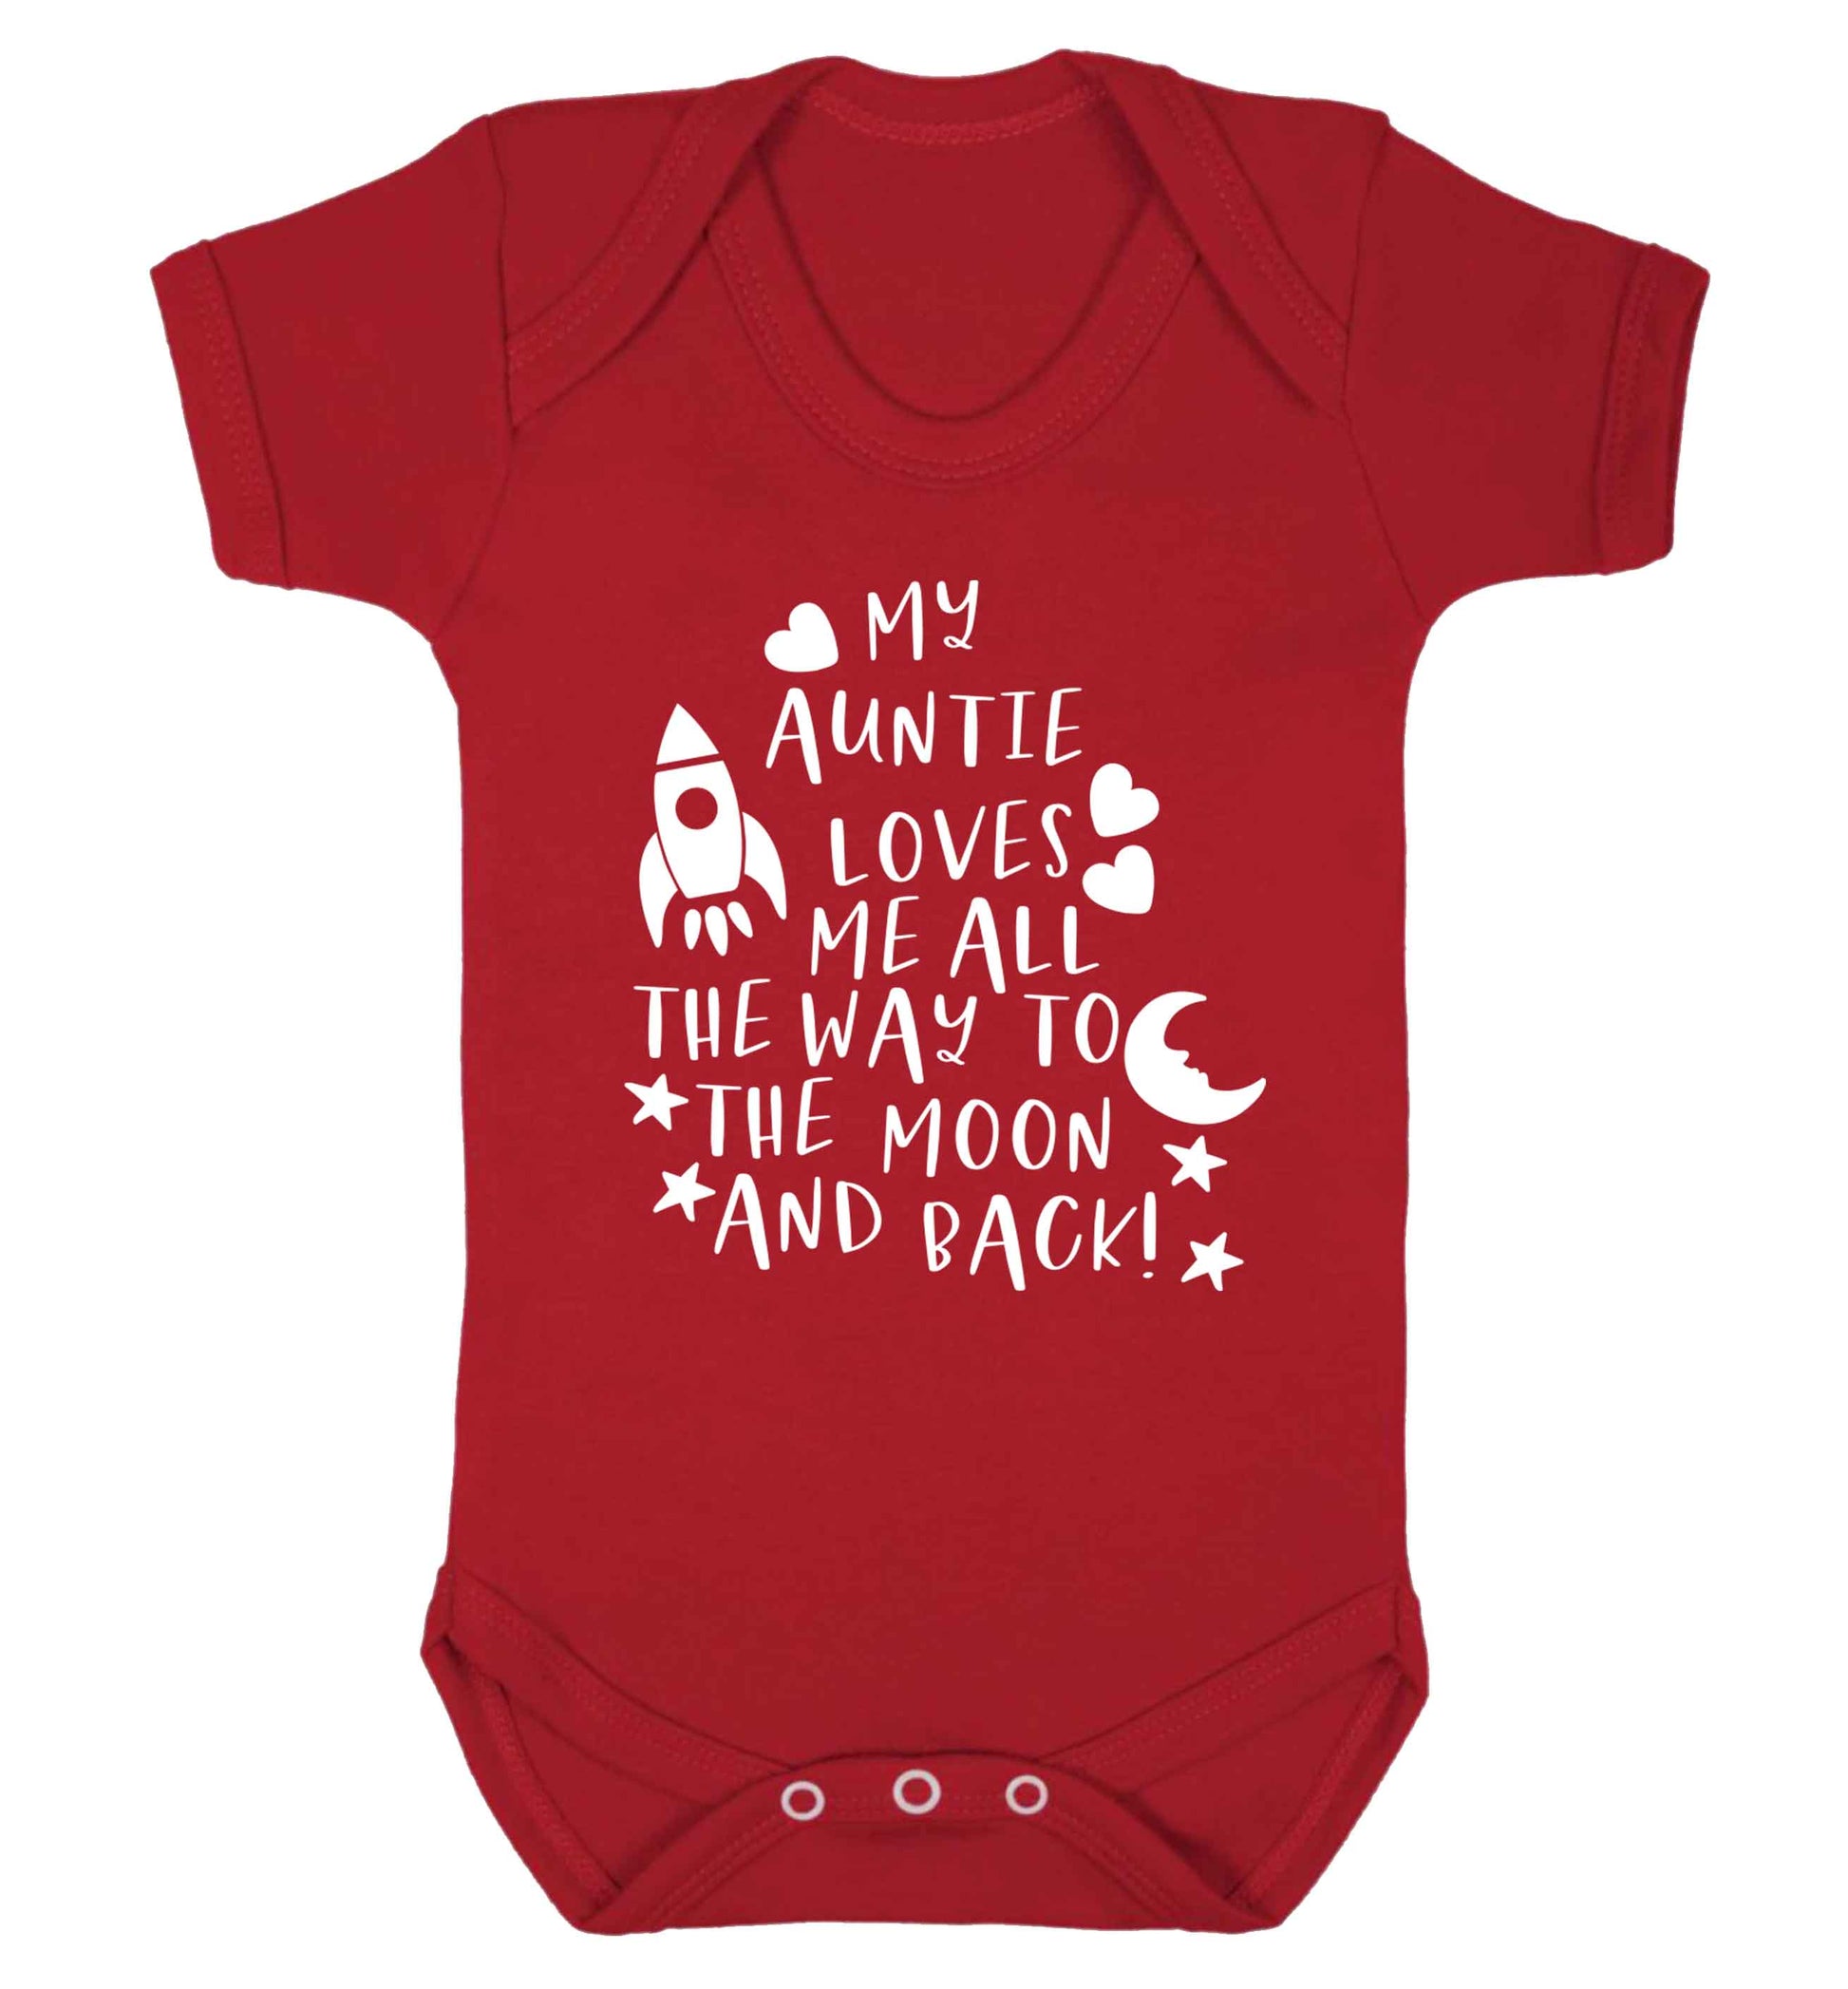 My auntie loves me all the way to the moon and back Baby Vest red 18-24 months